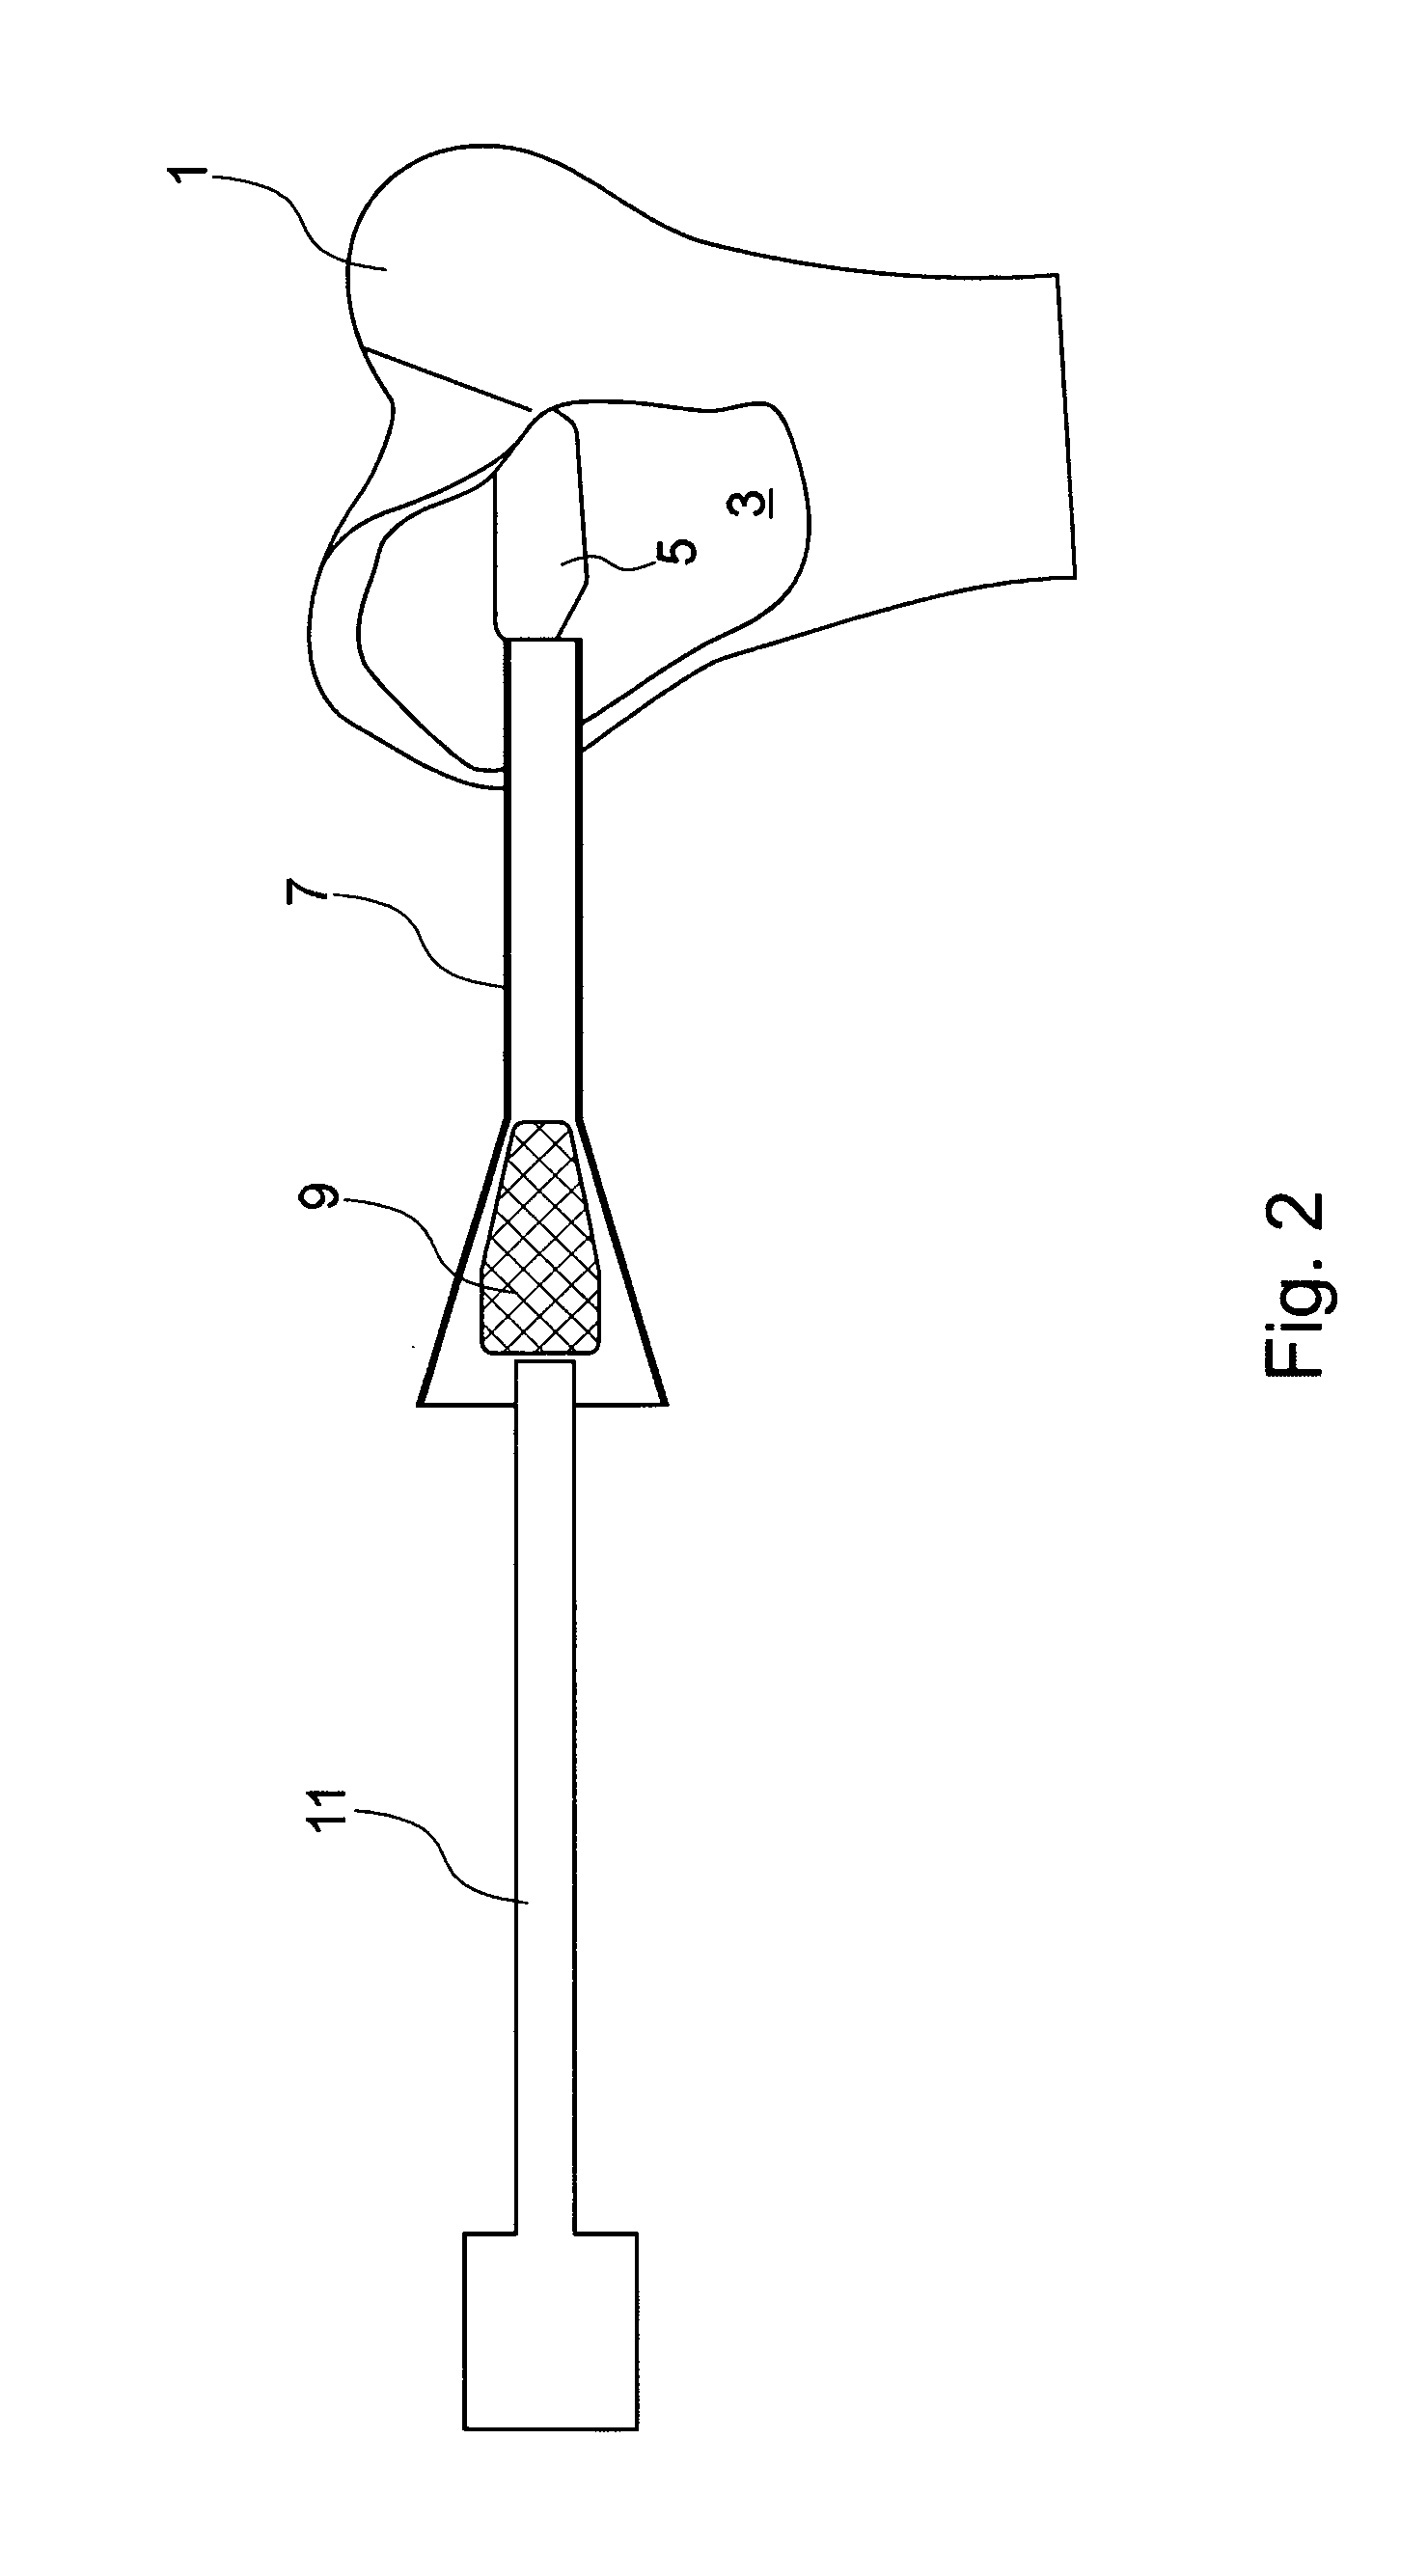 Synthetic bone substitute, method for preparing same and method for filing a cavity in a substrate